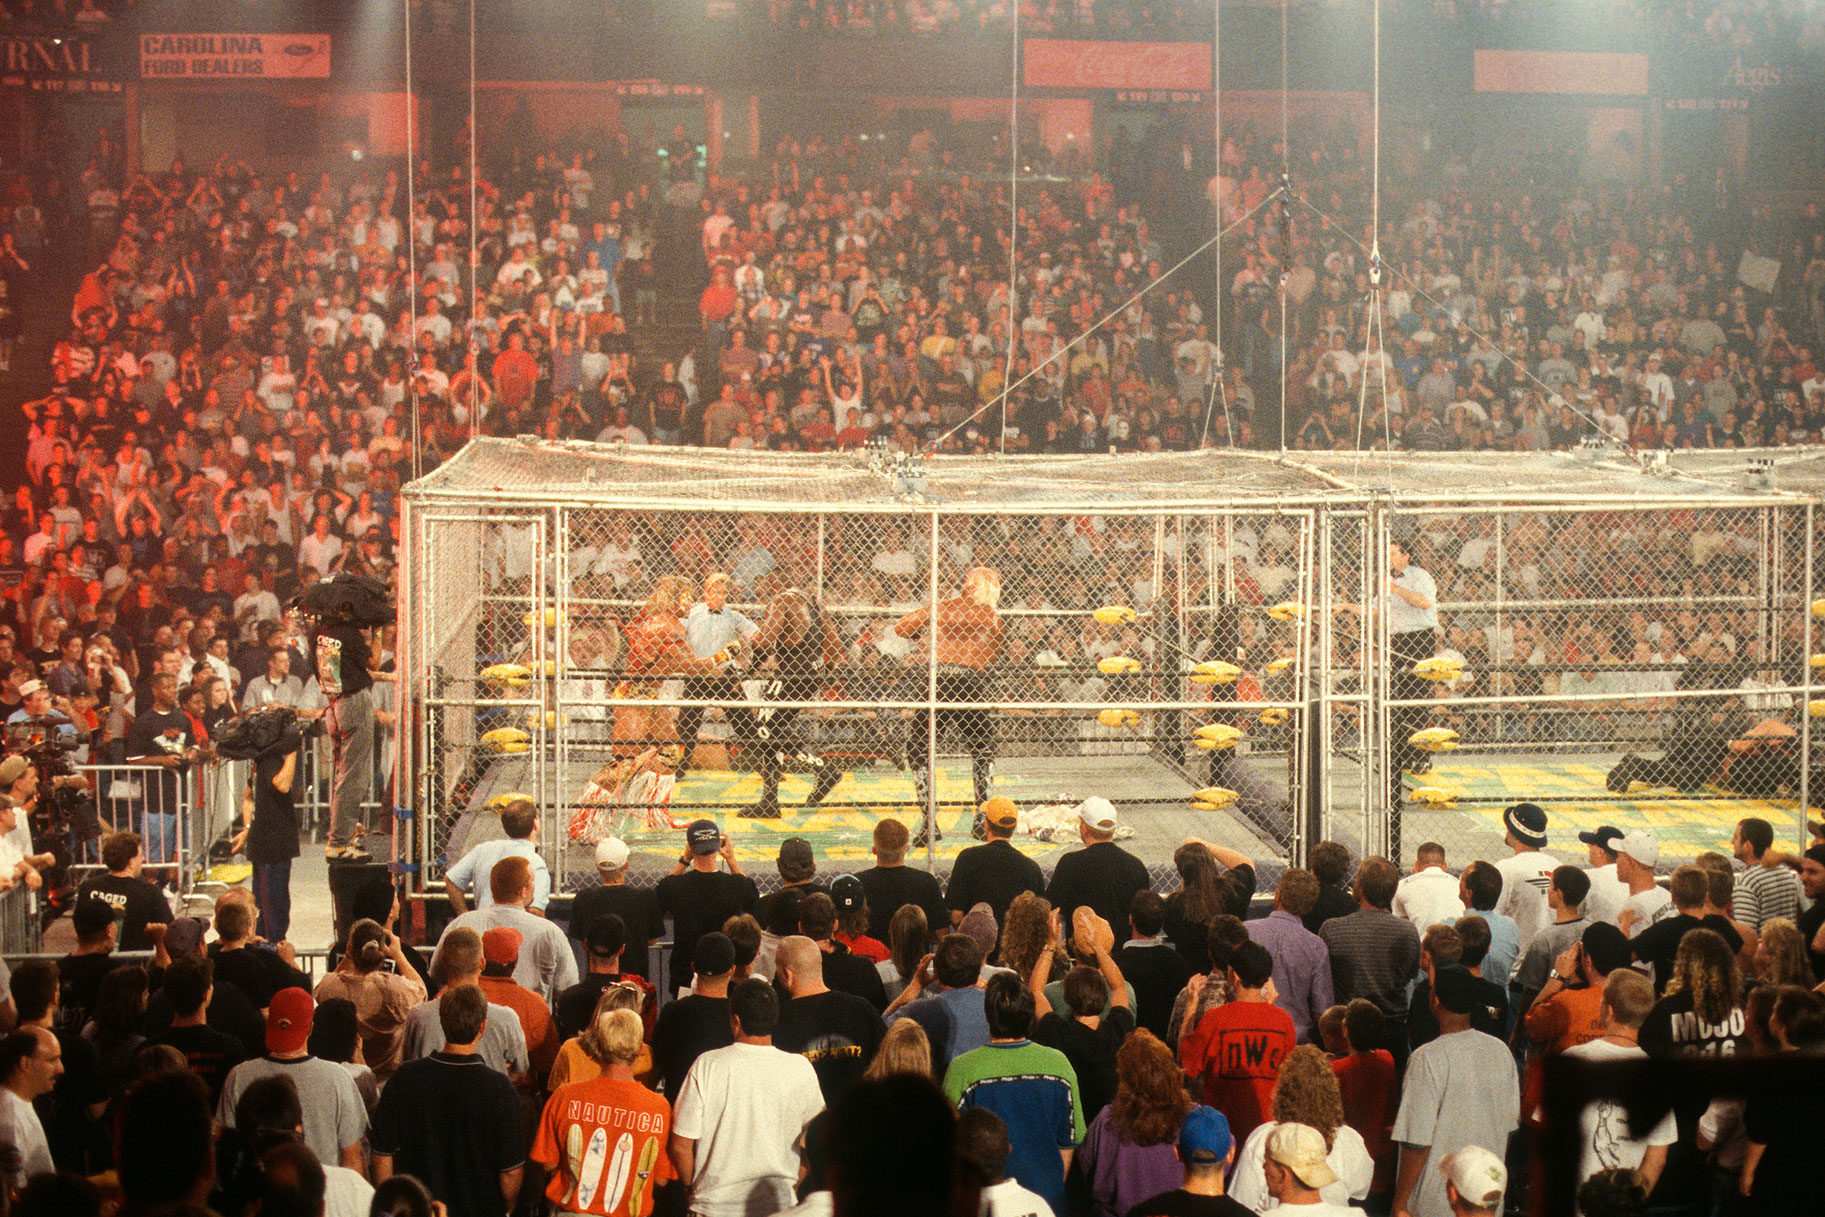 A cage surrounding the wrestling ring